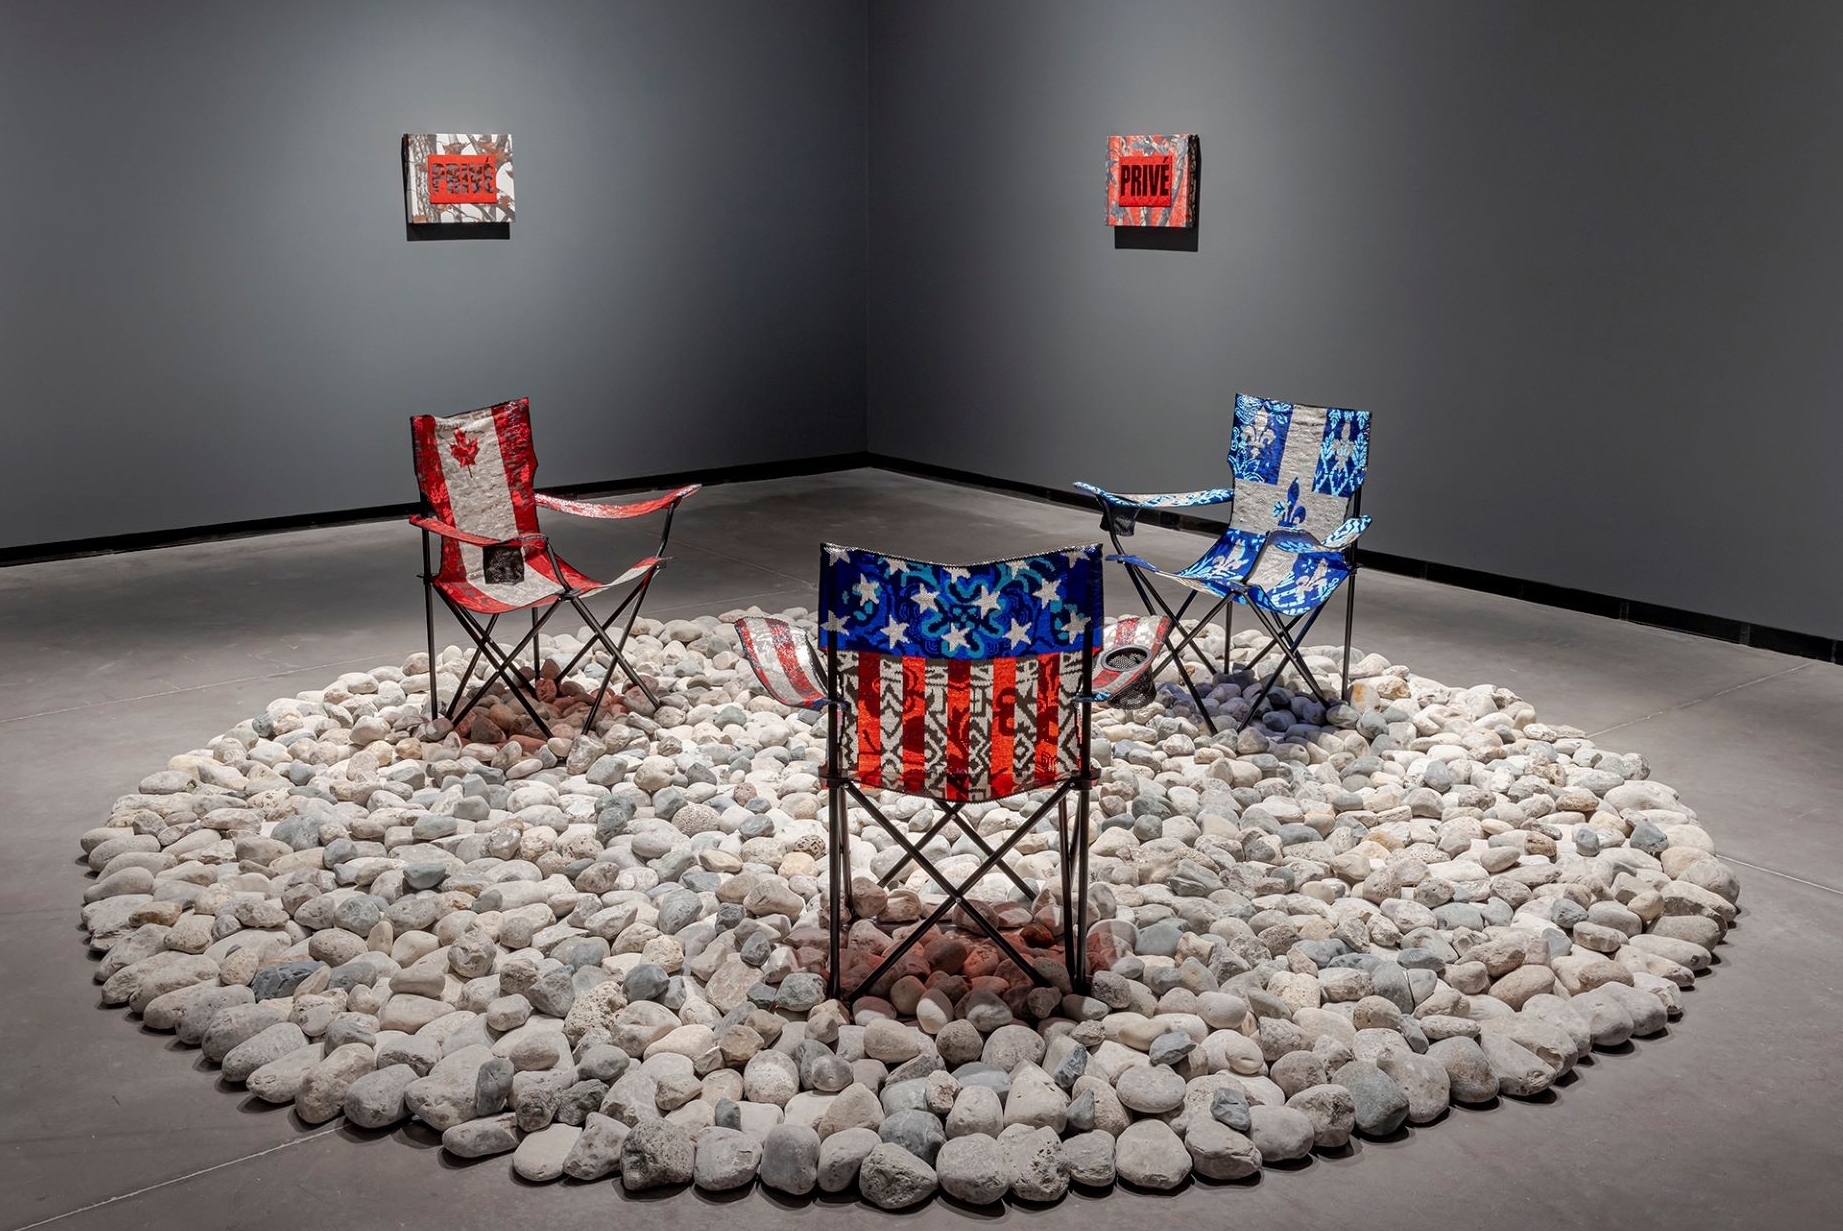 An art installation featuring folding chairs decorated with beadwork, placed in a circle on a bed of rocks.